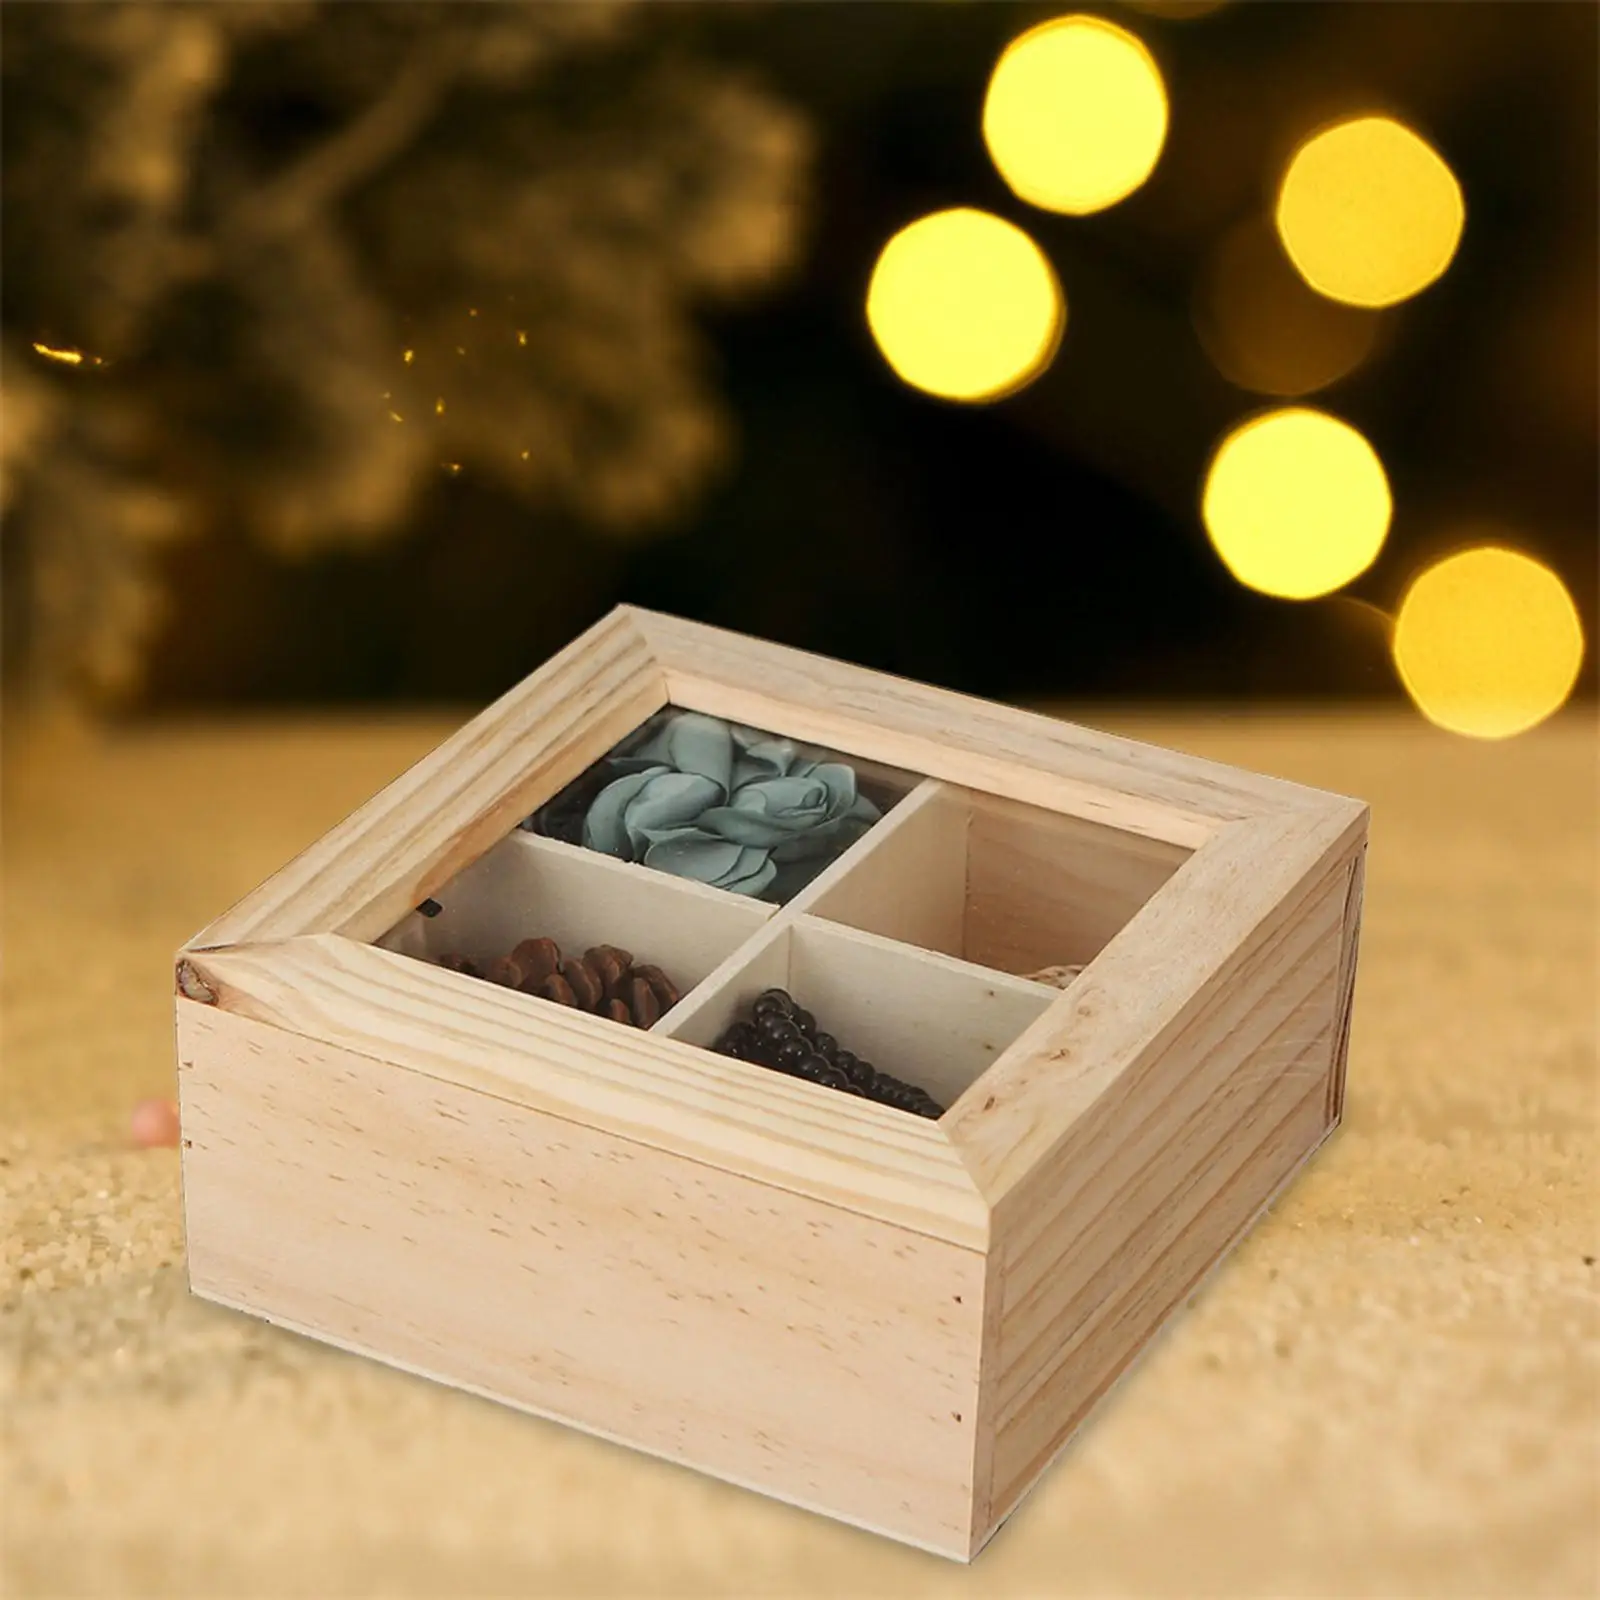 Wooden Storage Box Jewelry Display Case with Lid Home Decor Tea Box Organizer for Jewelry Bracelets Necklaces Earrings Crafts